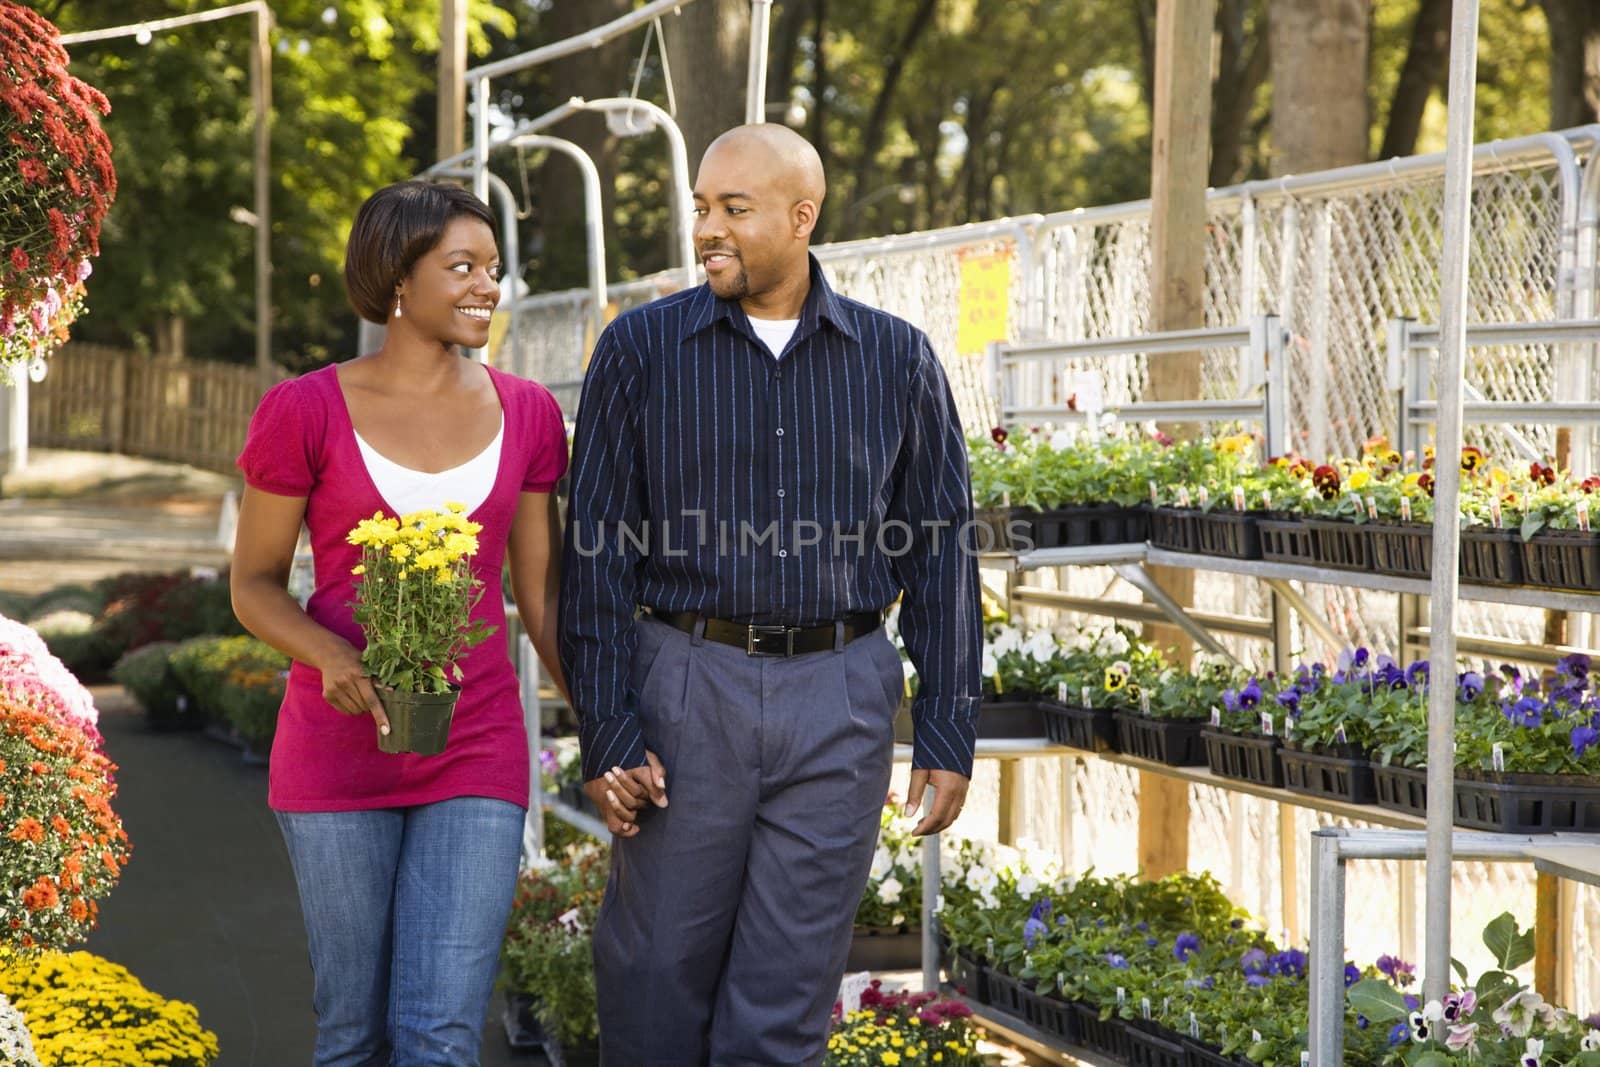 Happy smiling couple picking out flowers at outdoor plant market walking and holding hands.